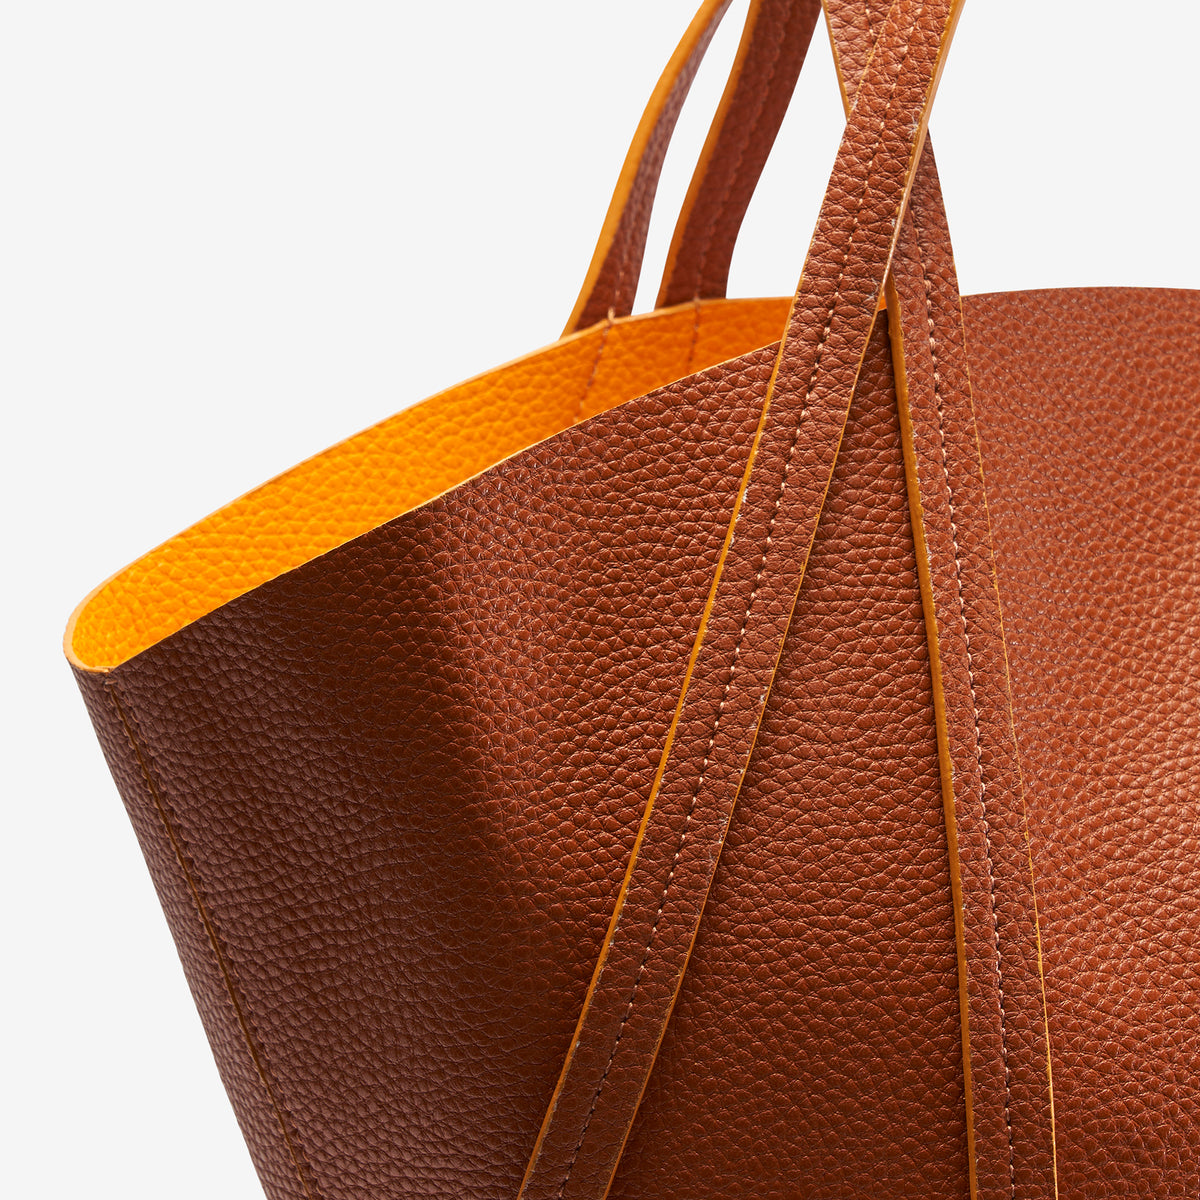     tusk-9931-recycled-sustainable-leather-tote-tan-detail-2